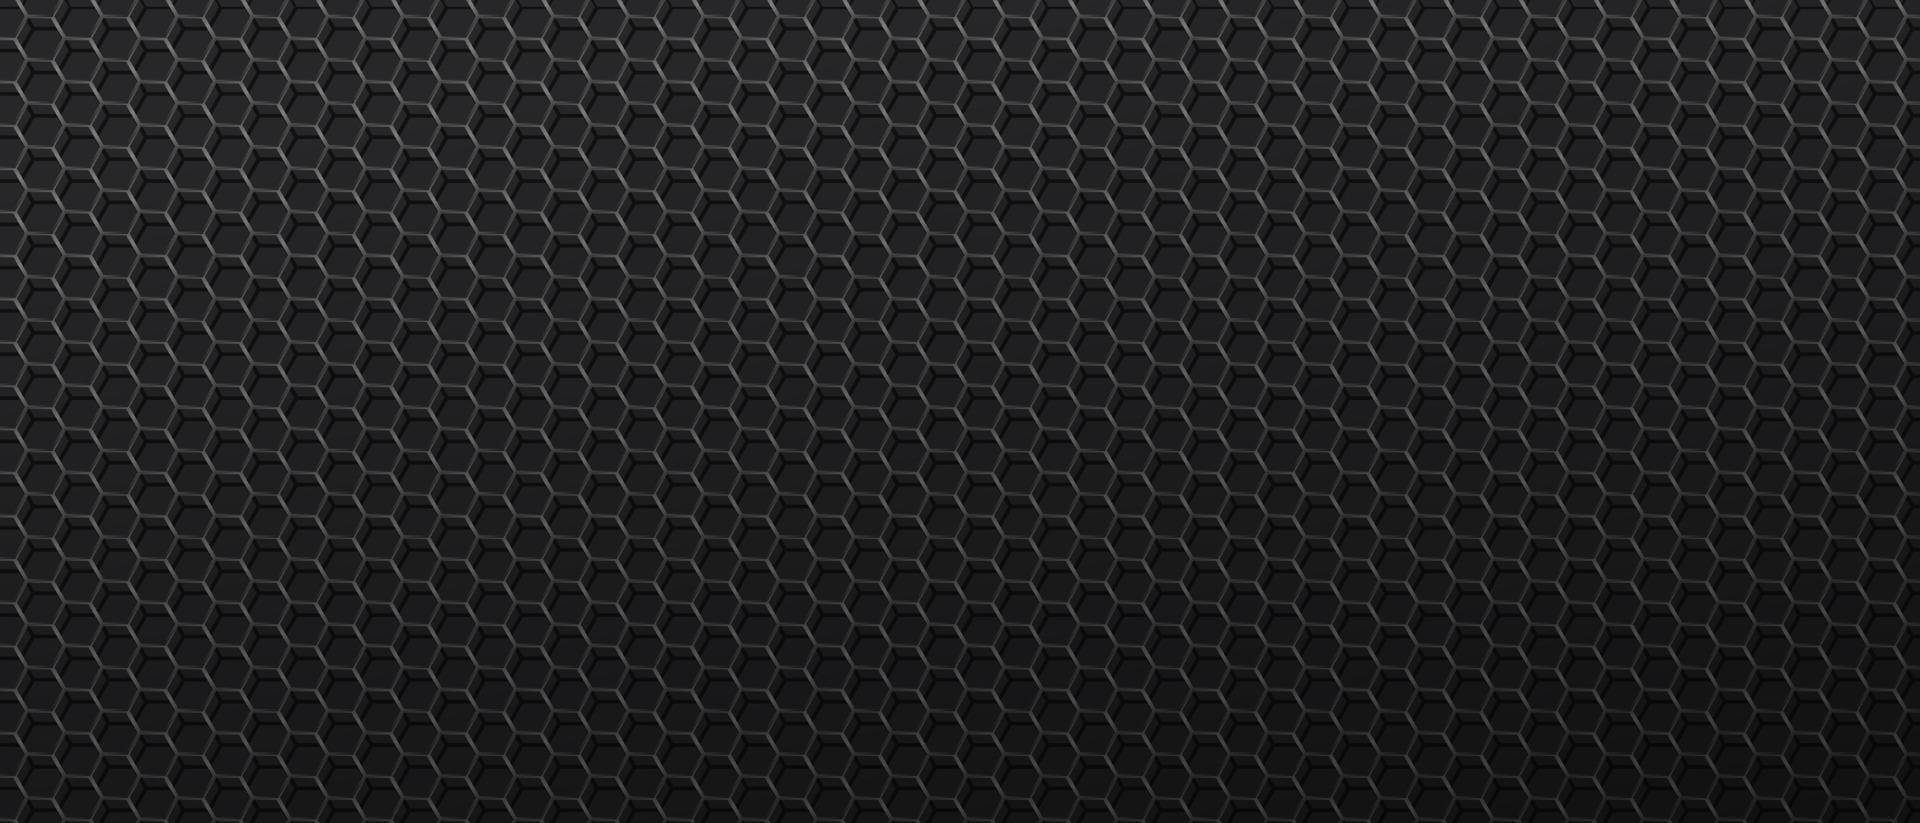 Black background with metal mesh with hexagonal cells. Decorative dark backdrop with metallic polygonal grid or net. Minimal banner with abstract pattern. Modern monochrome vector illustration.